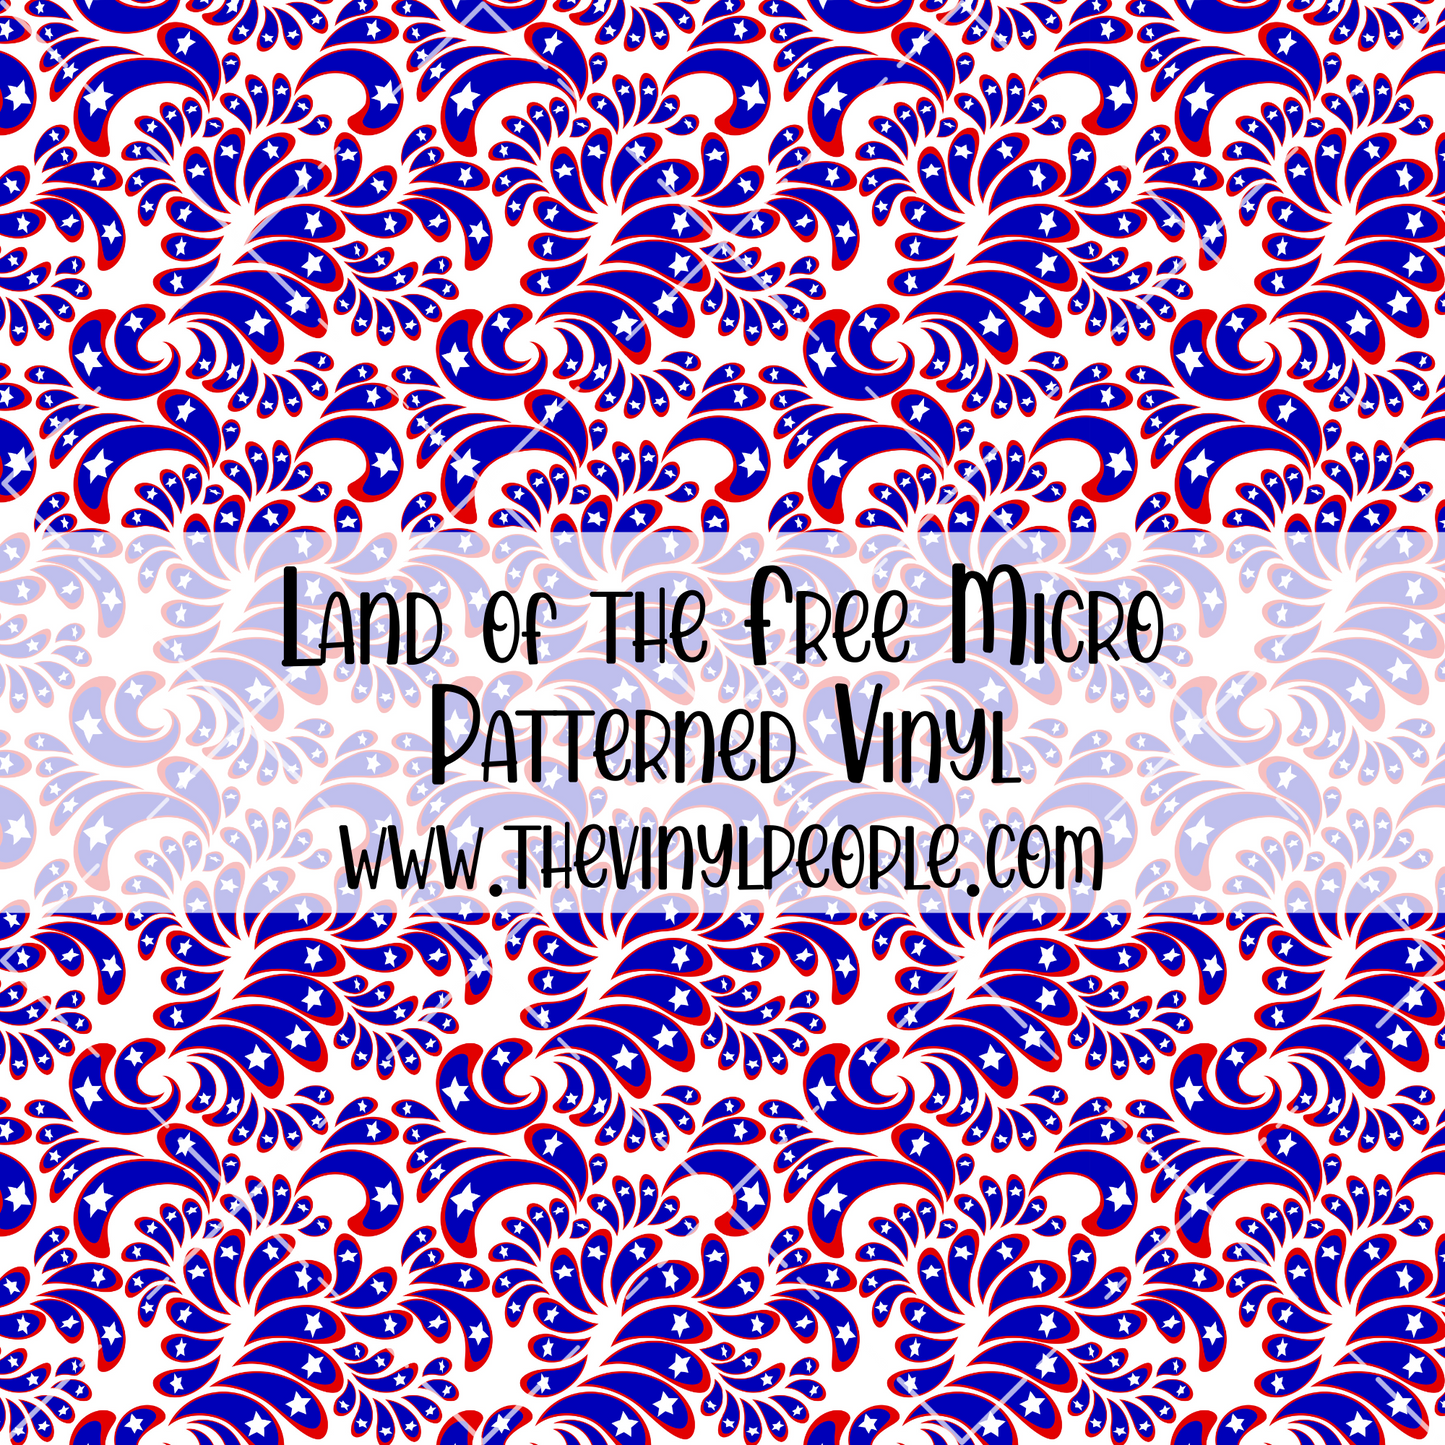 Land of the Free Patterned Vinyl